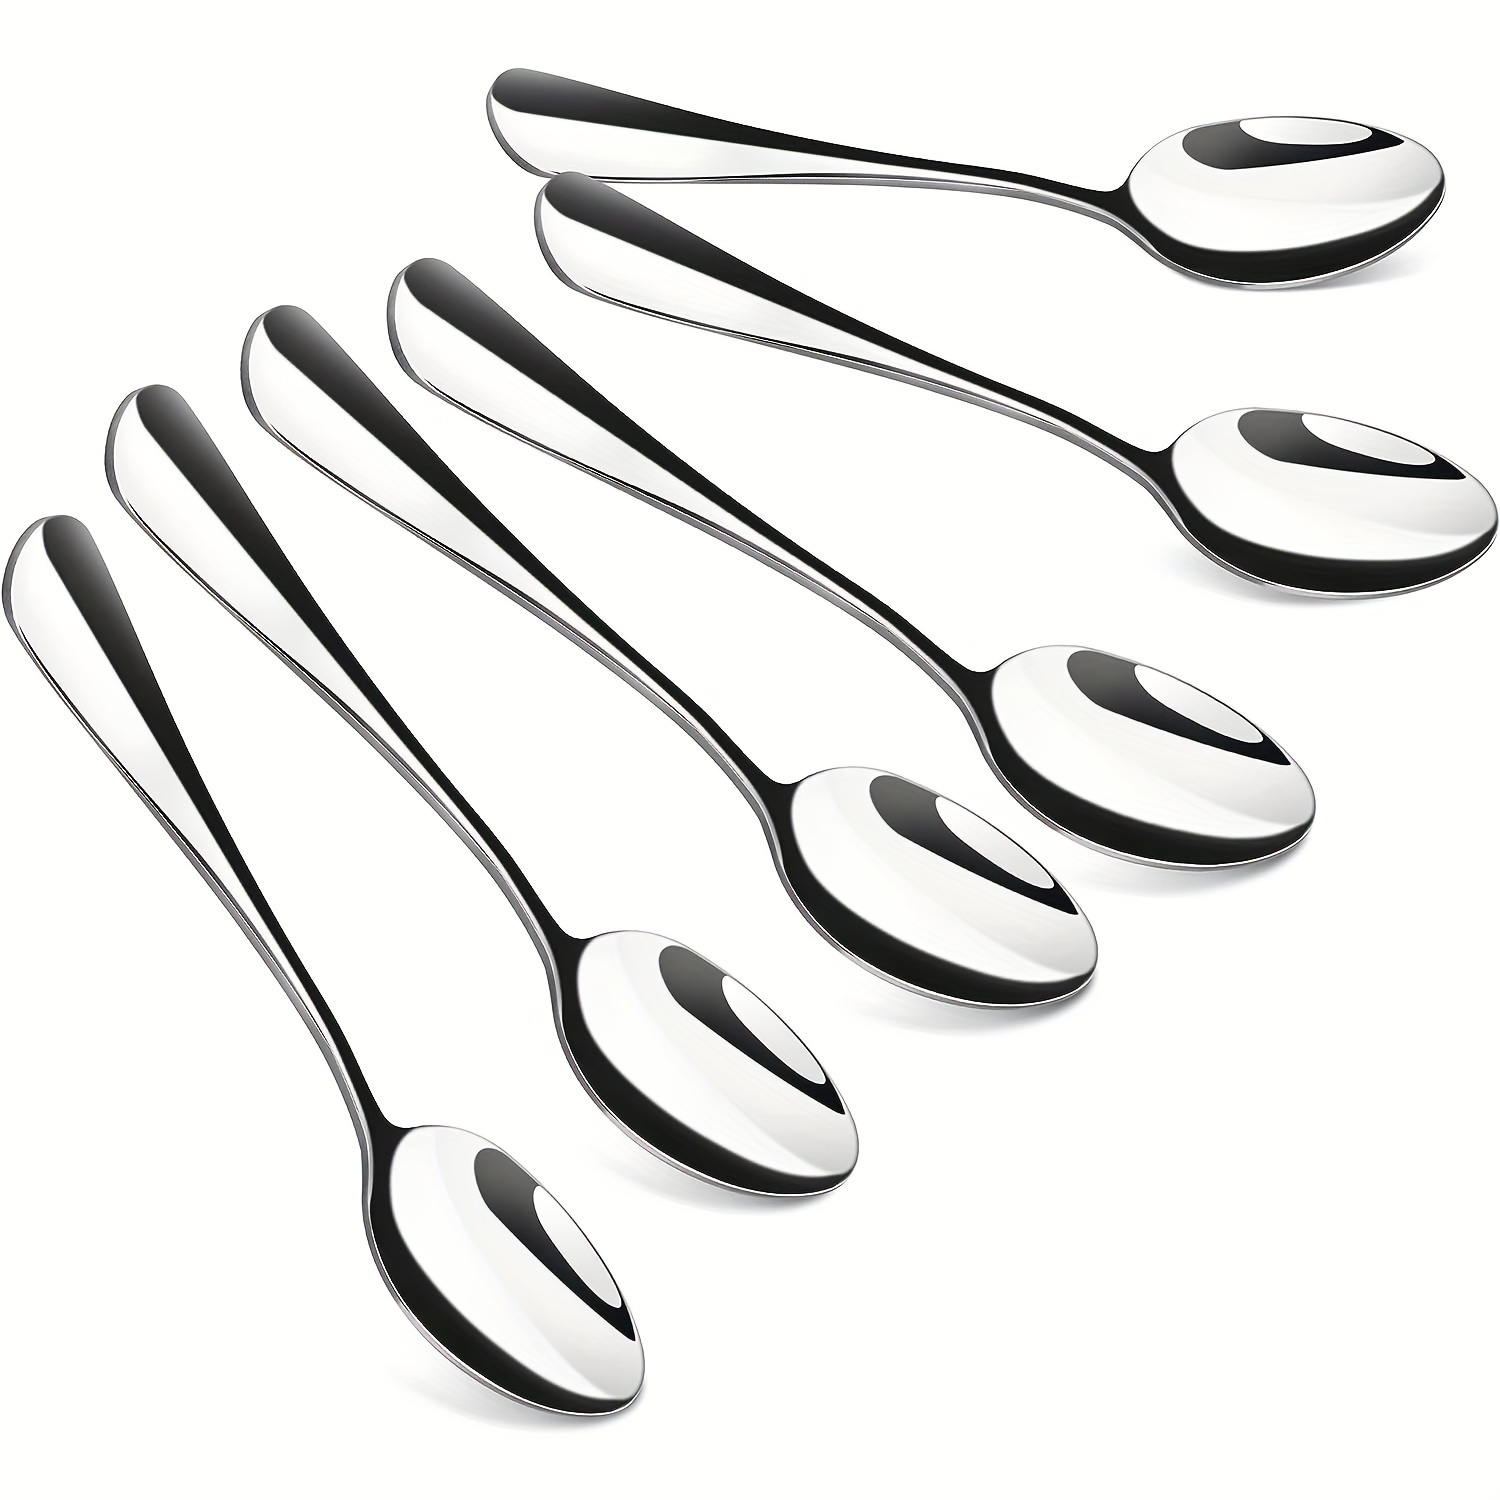 Lot of 6 Small Cooking Utensils Set of Spoons Scoop Fork 